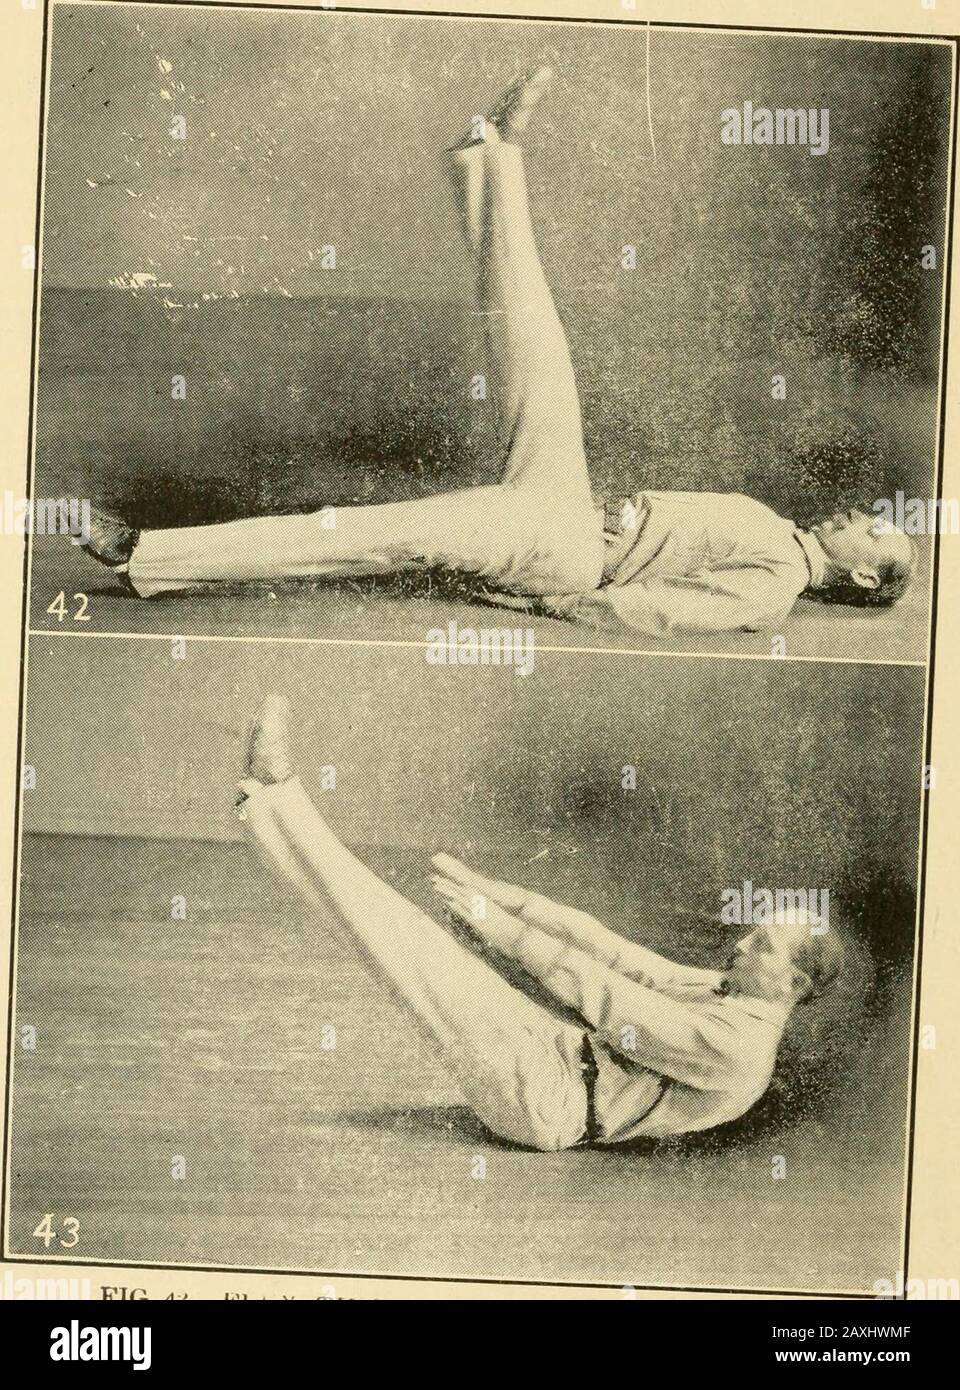 Graded calisthenic and dumb bell drills . (d) Alternate. (Fig. 2. In the stride-stoop-stand. 3. Arch—walk—stand (Fig. 5). 4. With leg movements. 5. With body movements. 6. With leg and body move-ments. 2. Head movements with resistance of hands. (a) Forward bend (Fig.21, b). (b) Side bend (Fig. 22, b). (c) Backward bend (Fig.21, a). (d) Project and retract(Fig. 23). (e) Rotate. (f) Circumduct. 3. Arm swings and circles, (a) Forward to vertical(Fig. 2&gt;7&gt;). (b) Sideways to vertical(Fig. 34). (c) In horizontal plane(Fig. 35). (d) Circumduct backwardat side horizontal. 4. Hip bend (forward). Stock Photo